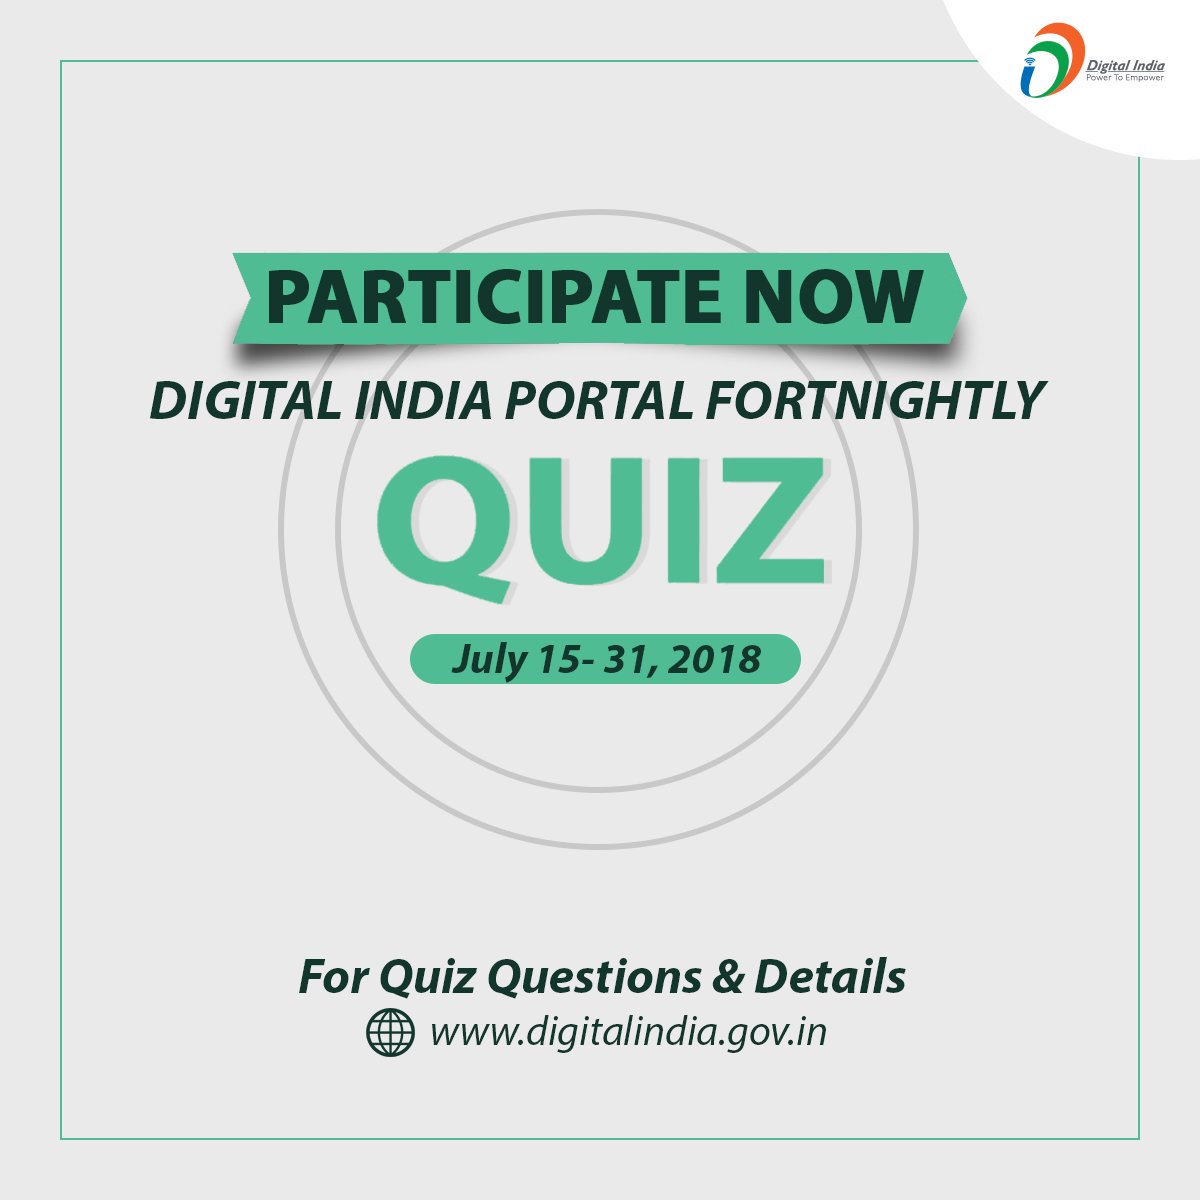 #QuizAlert |  Visit the official website for quiz questions and related details : digitalindia.gov.in/active-quiz 

*This is a participatory only quiz.*
#DigitalIndiaQuiz #DigitalIndia #ParticipateNow